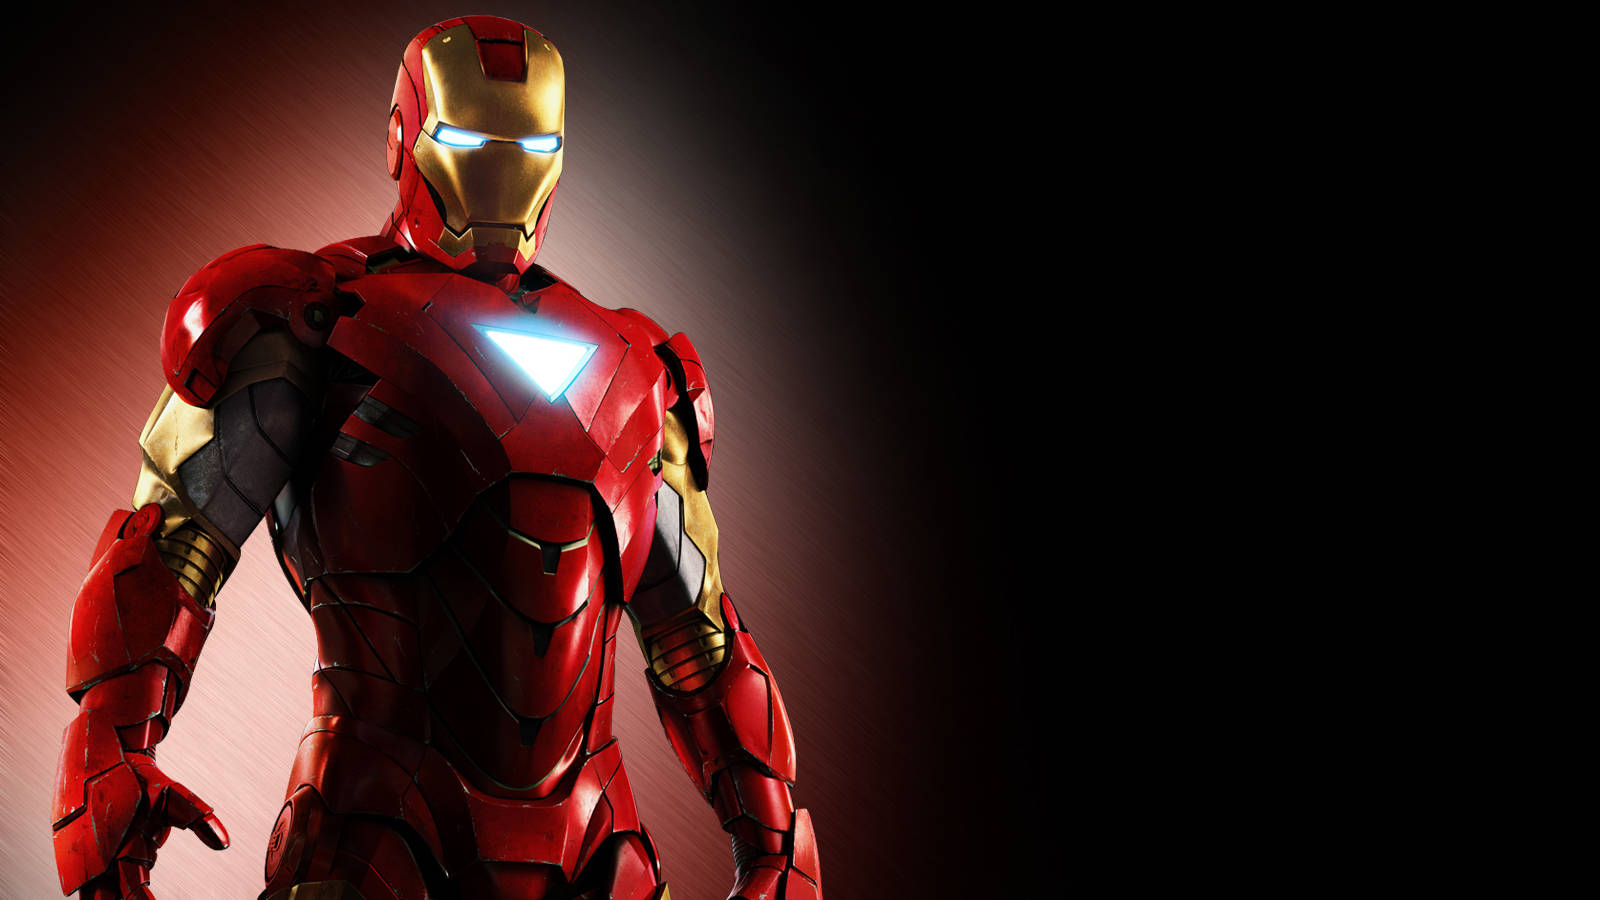 Cool Ironman Wallpapers